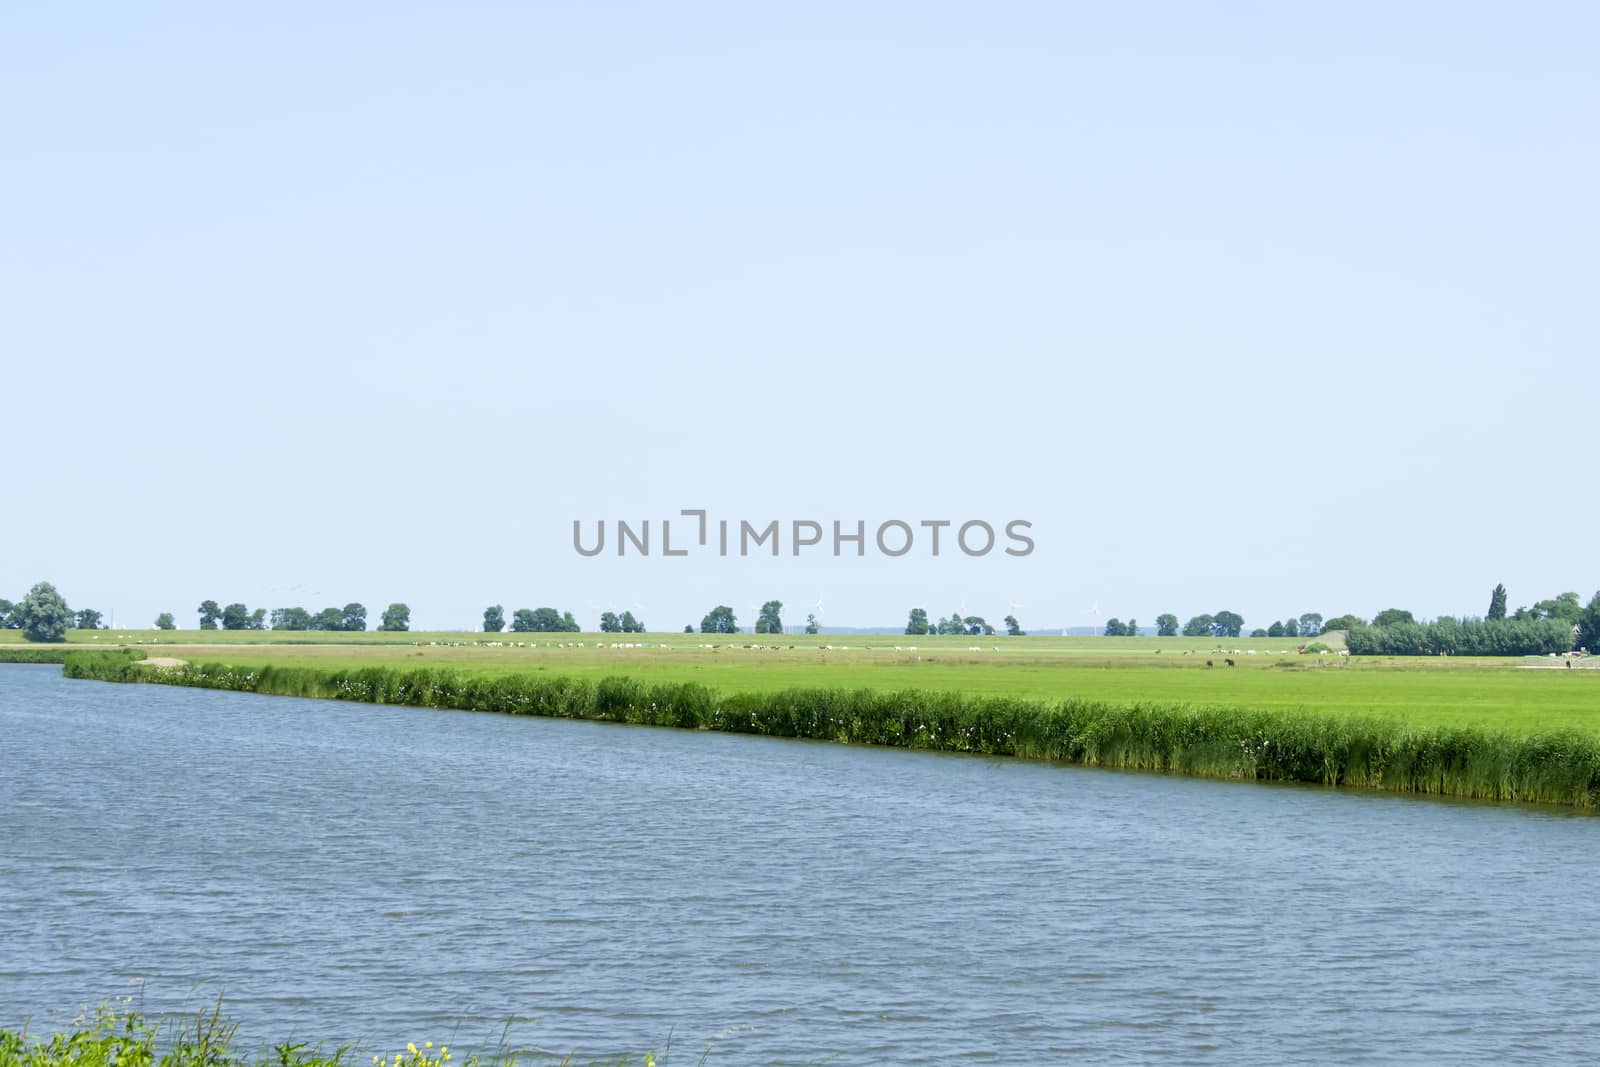 Rural dutch landscape with sheep and a small river  by Tetyana